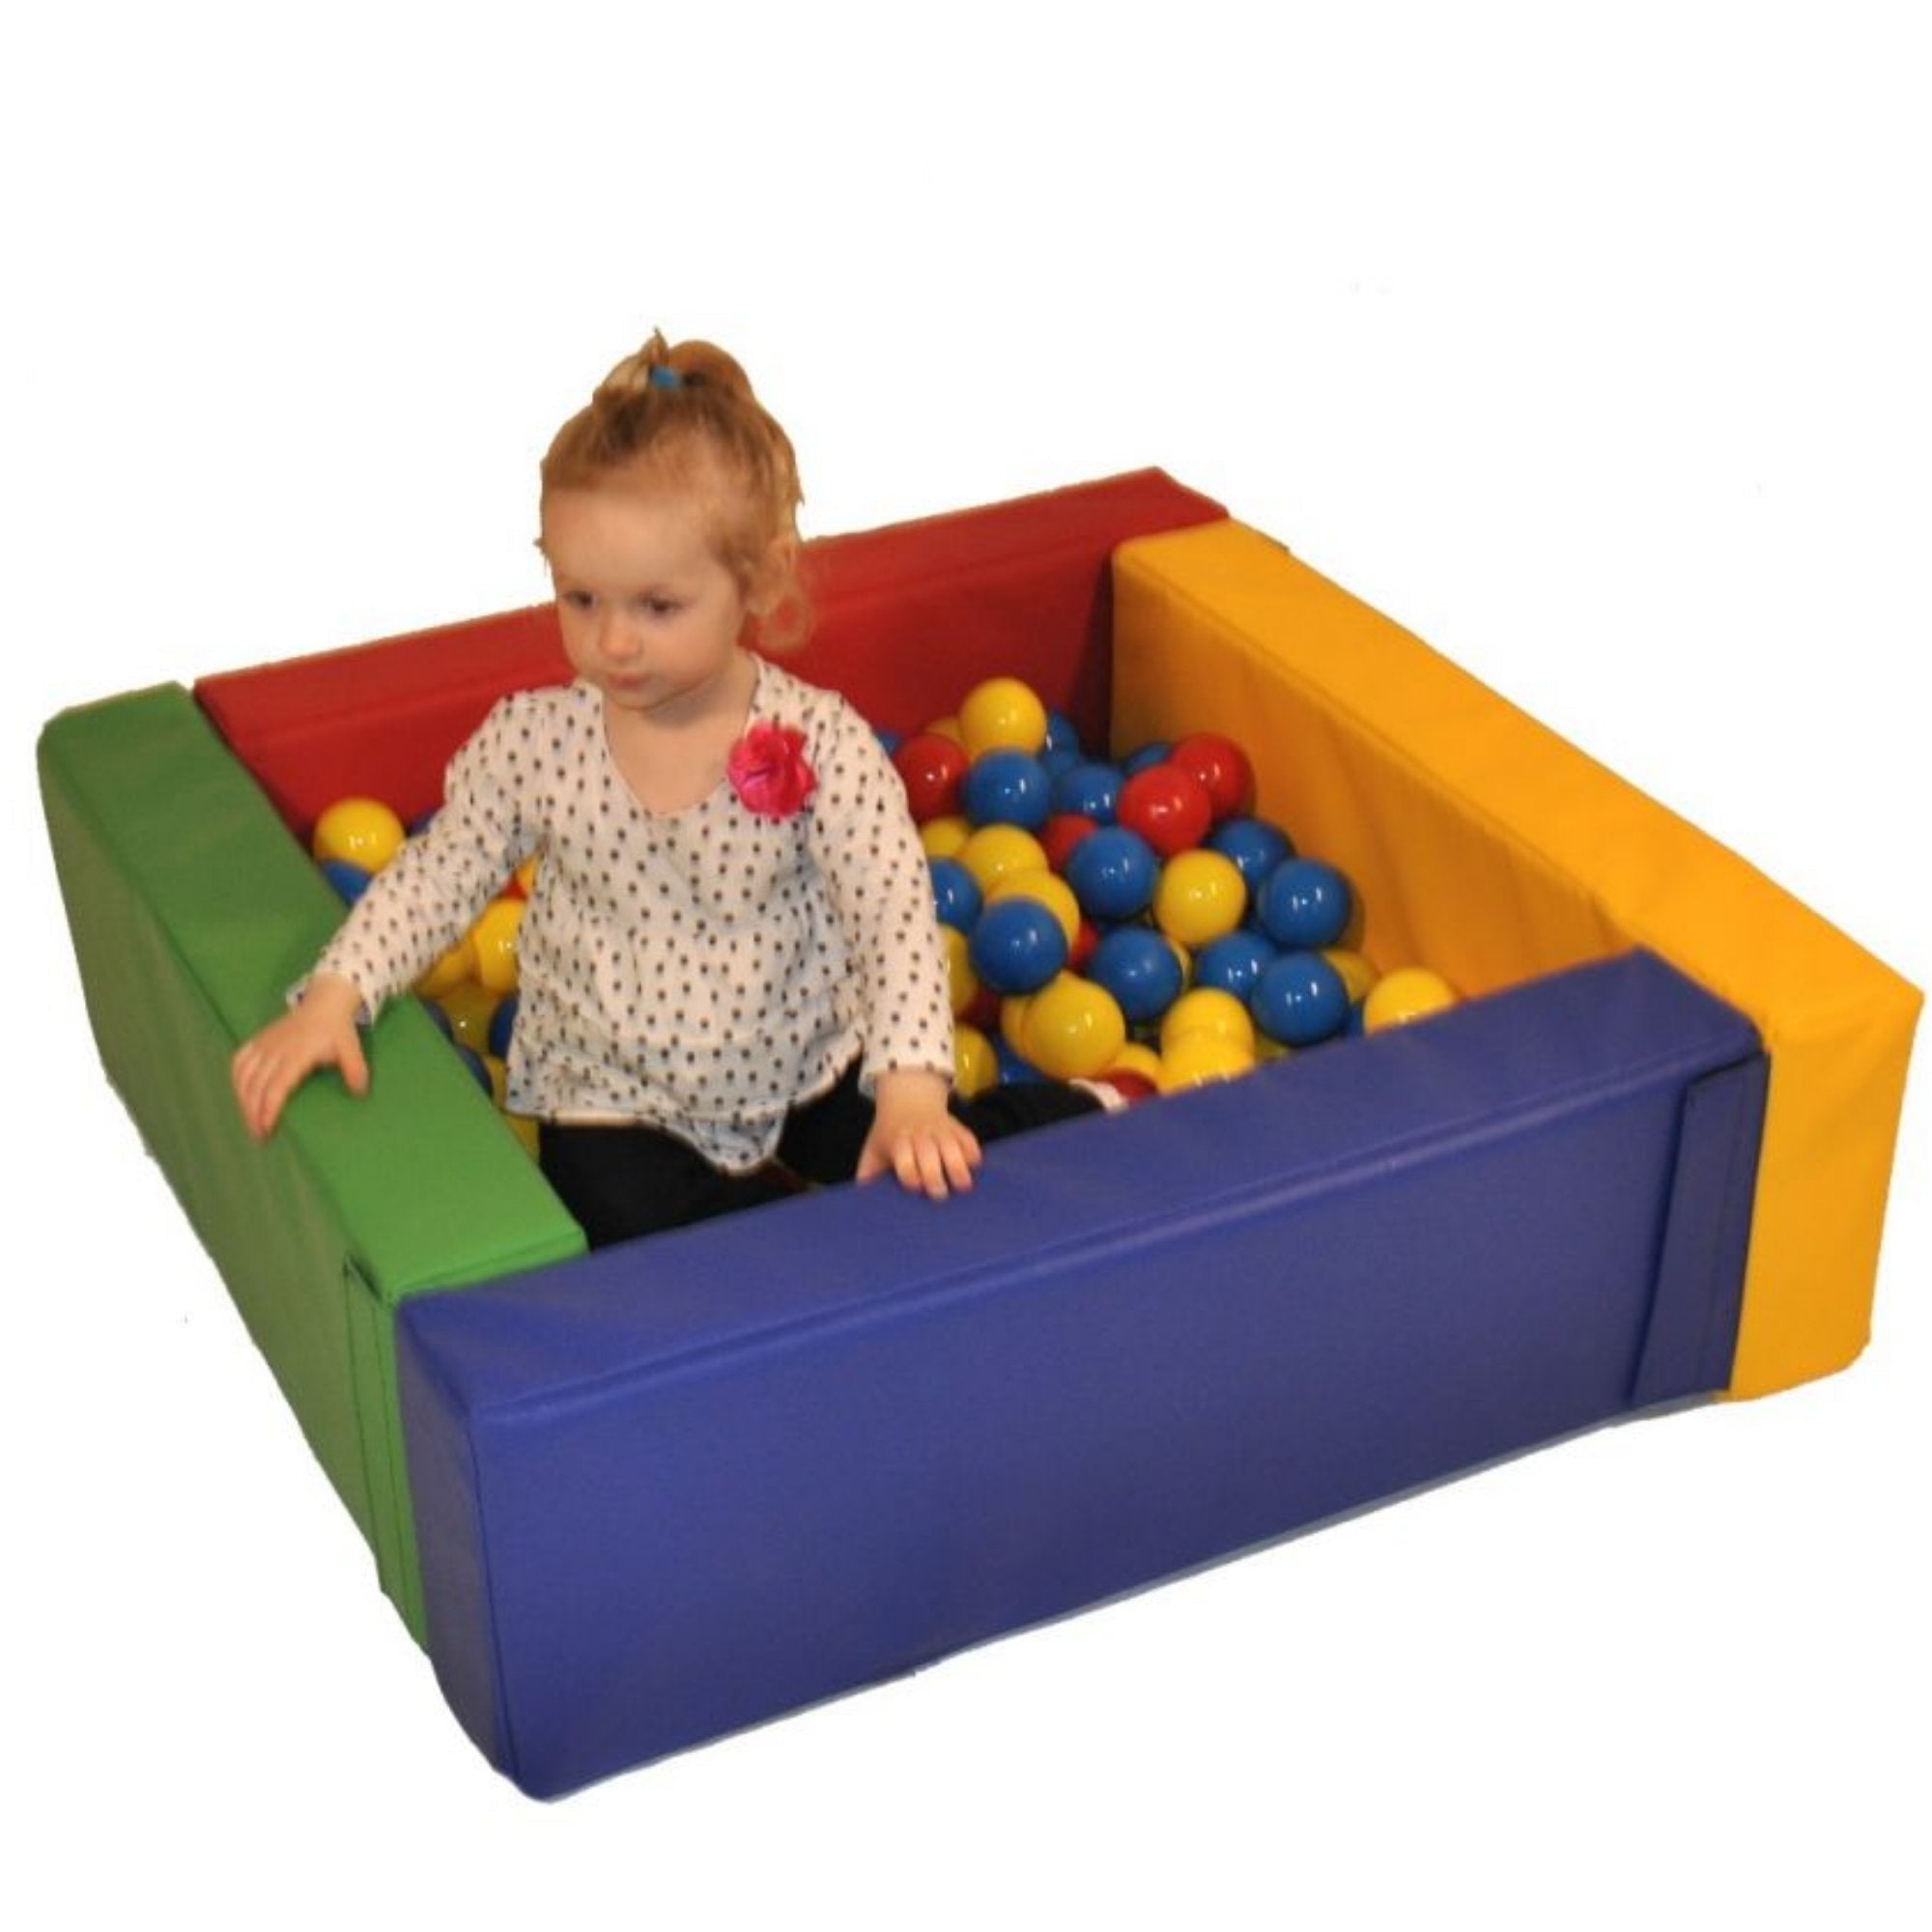 Soft Play Small Square Ball Pool, The Soft Play Small Square Ball Pool will provide great fun for toddlers and will easily fit in the home or school/nursery where space is limited. The Soft Play Small Square Ball Pool is the perfect colourful addition to any early years setting adding both colour and style and being practical with a wipe clean ability. The 1-meter Square Ball Pool is an excellent solution for anyone wanting a large Ball Pool for a single child but still needing the flexibility provided by a